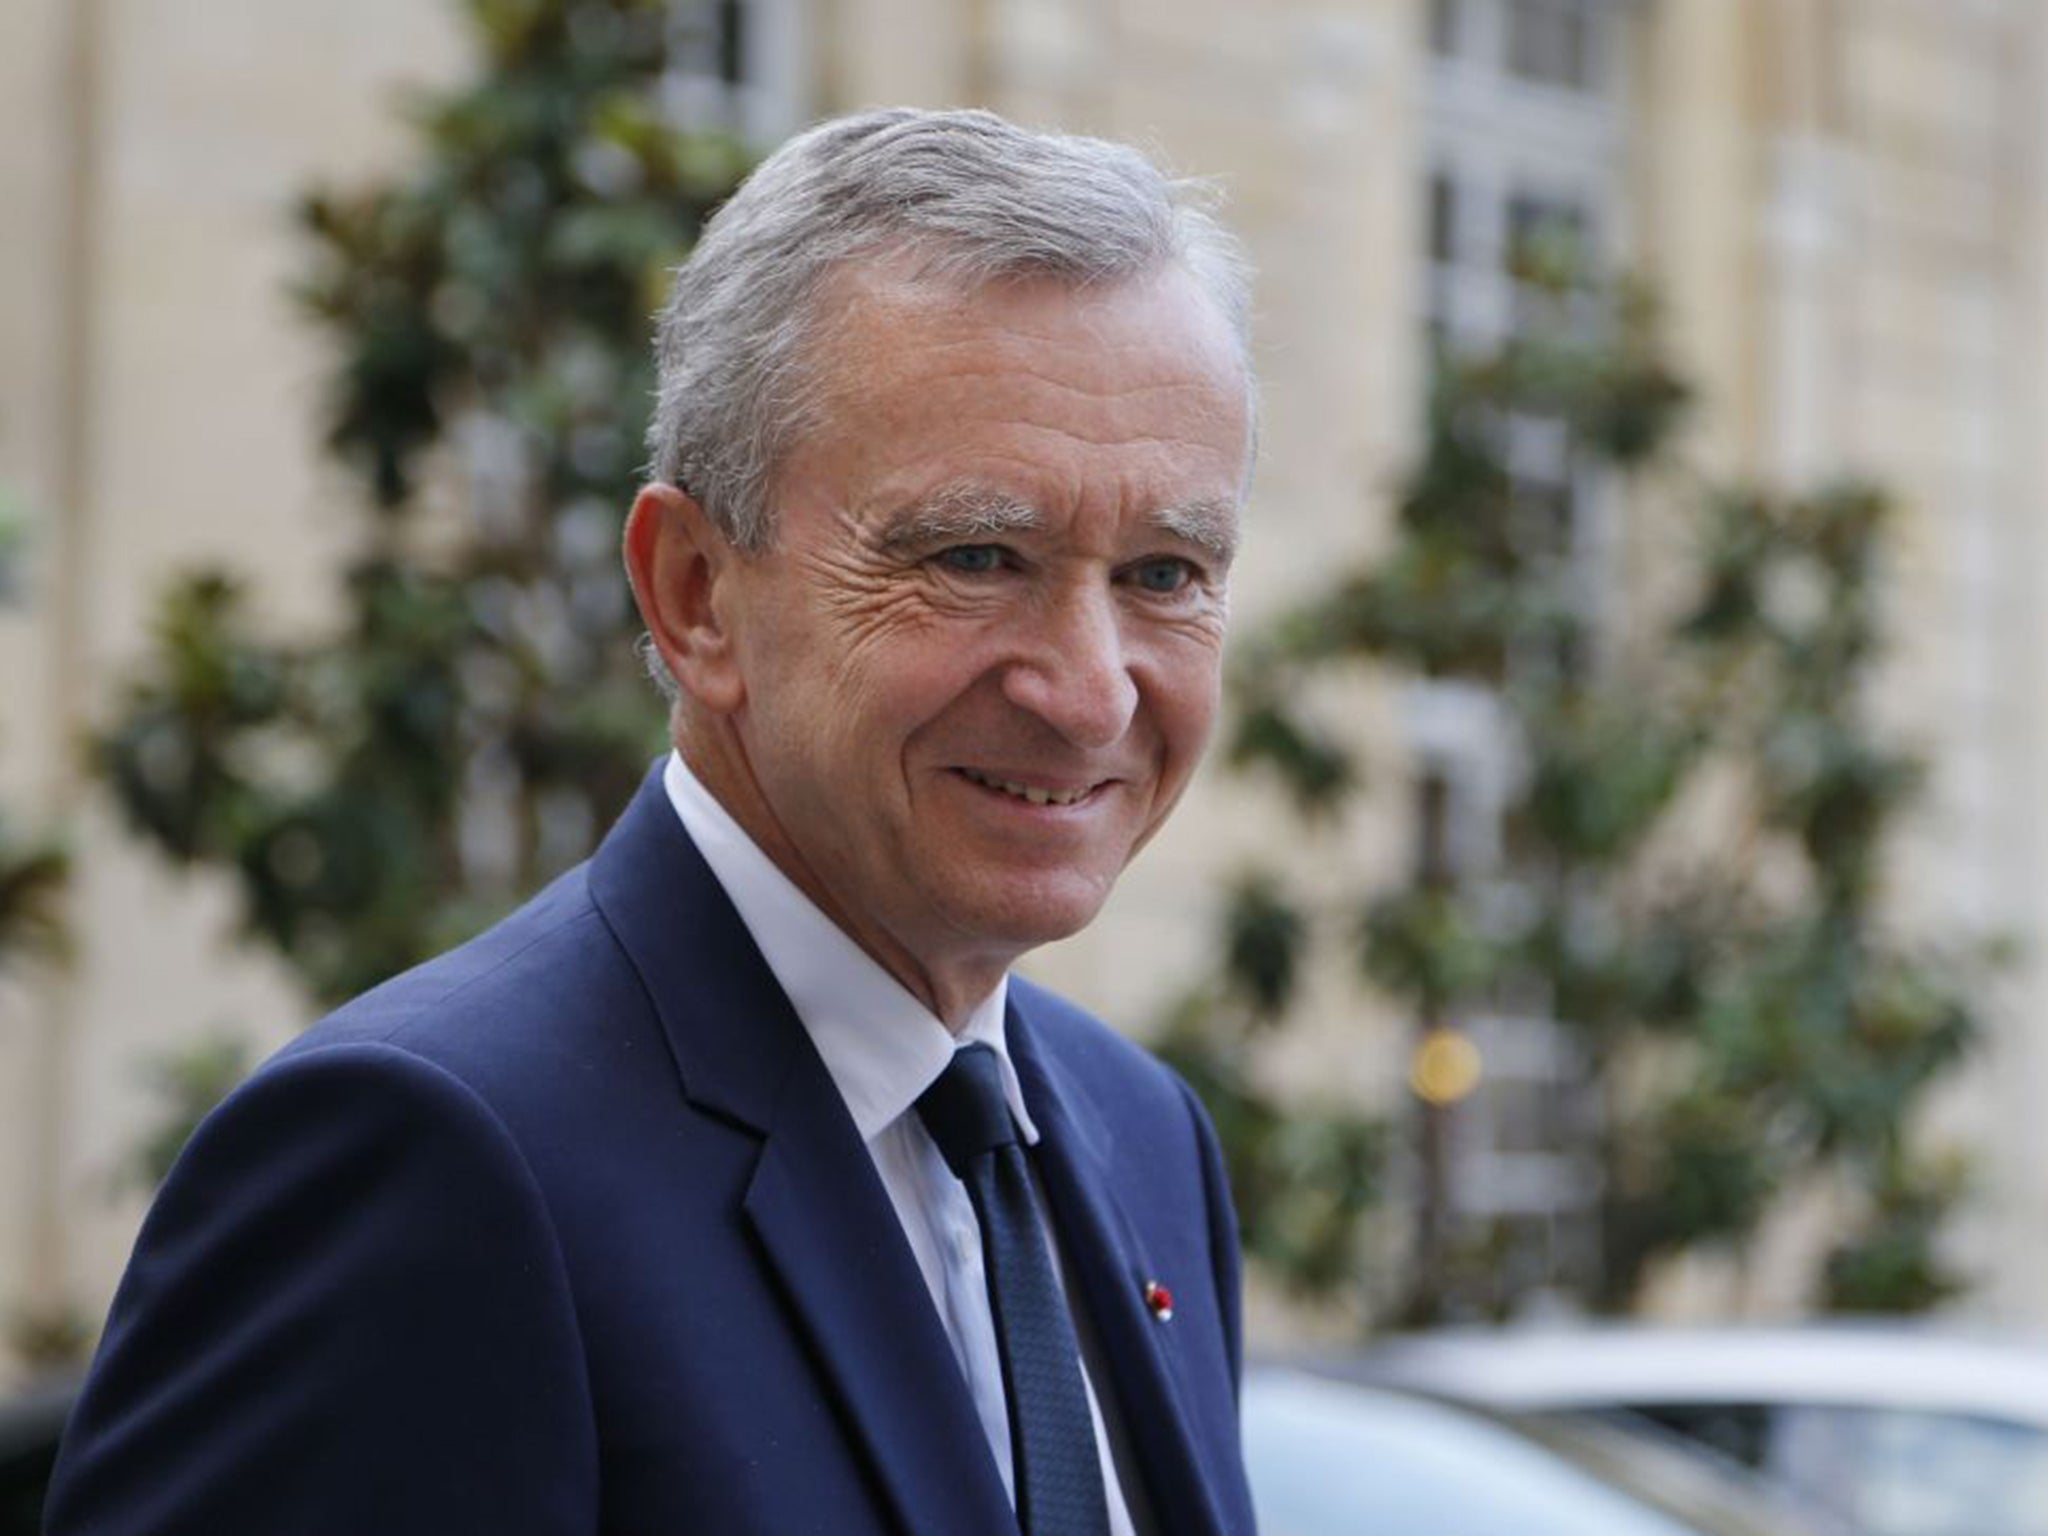 ‘Where is the tape recorder? I hope this is not being recorded.’ Bernard Arnault was the victim of a sting